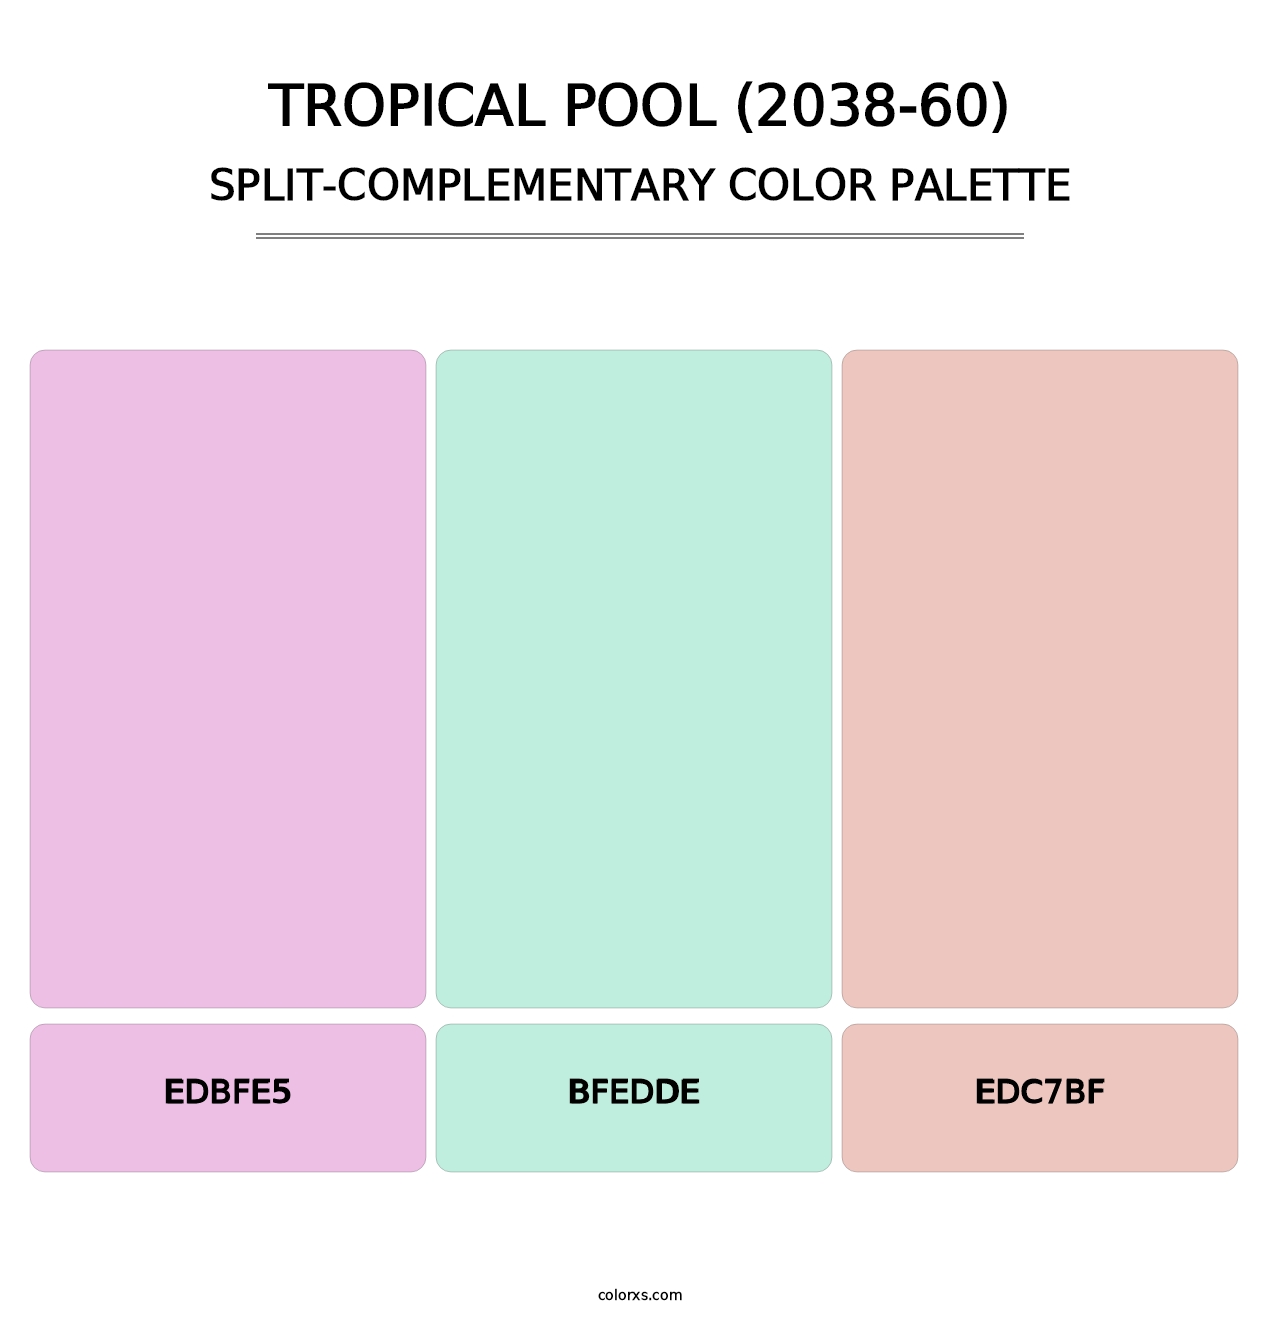 Tropical Pool (2038-60) - Split-Complementary Color Palette